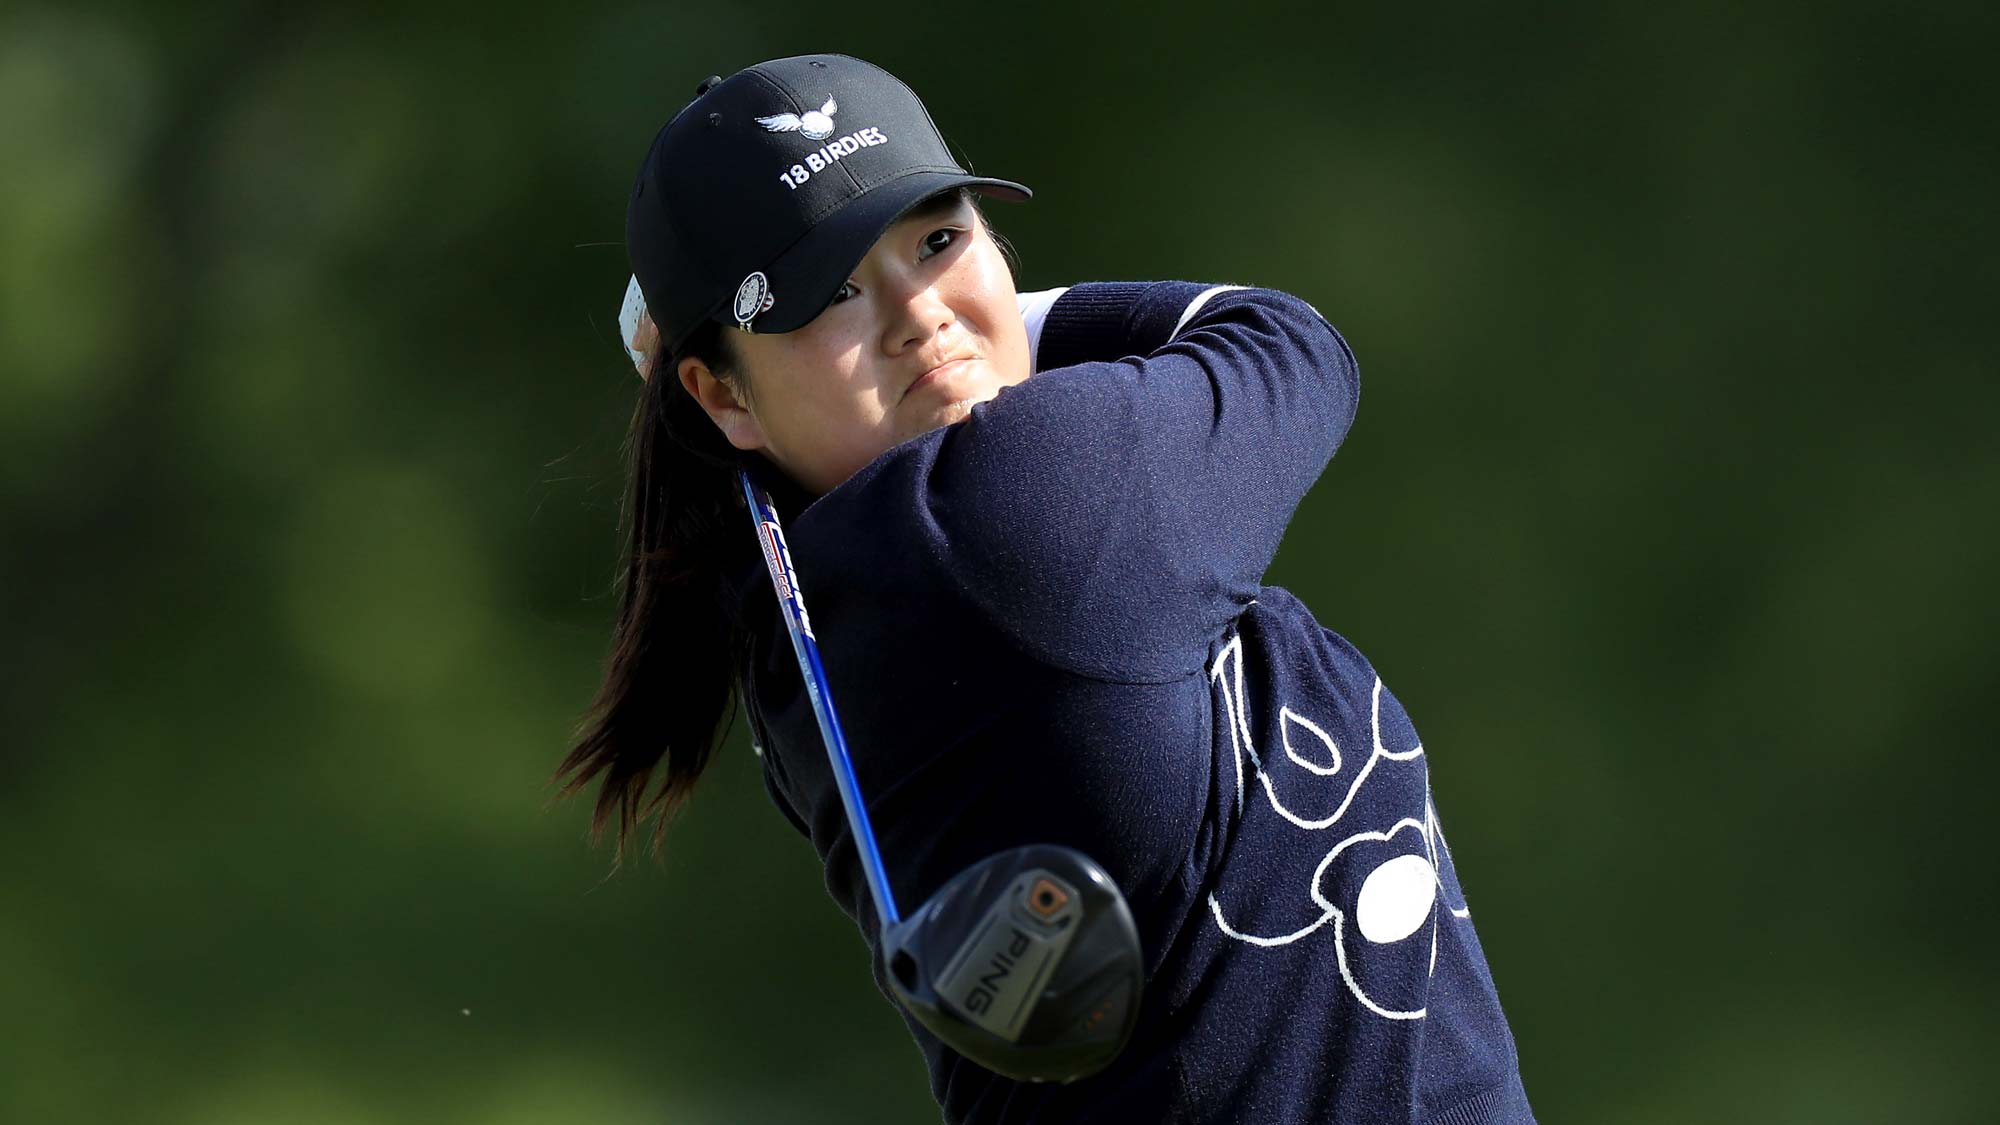 Angel Yin of the United States plays her tee shot on the par 4, 12th hole during the first round of the 2019 KPMG Women's PGA Championship